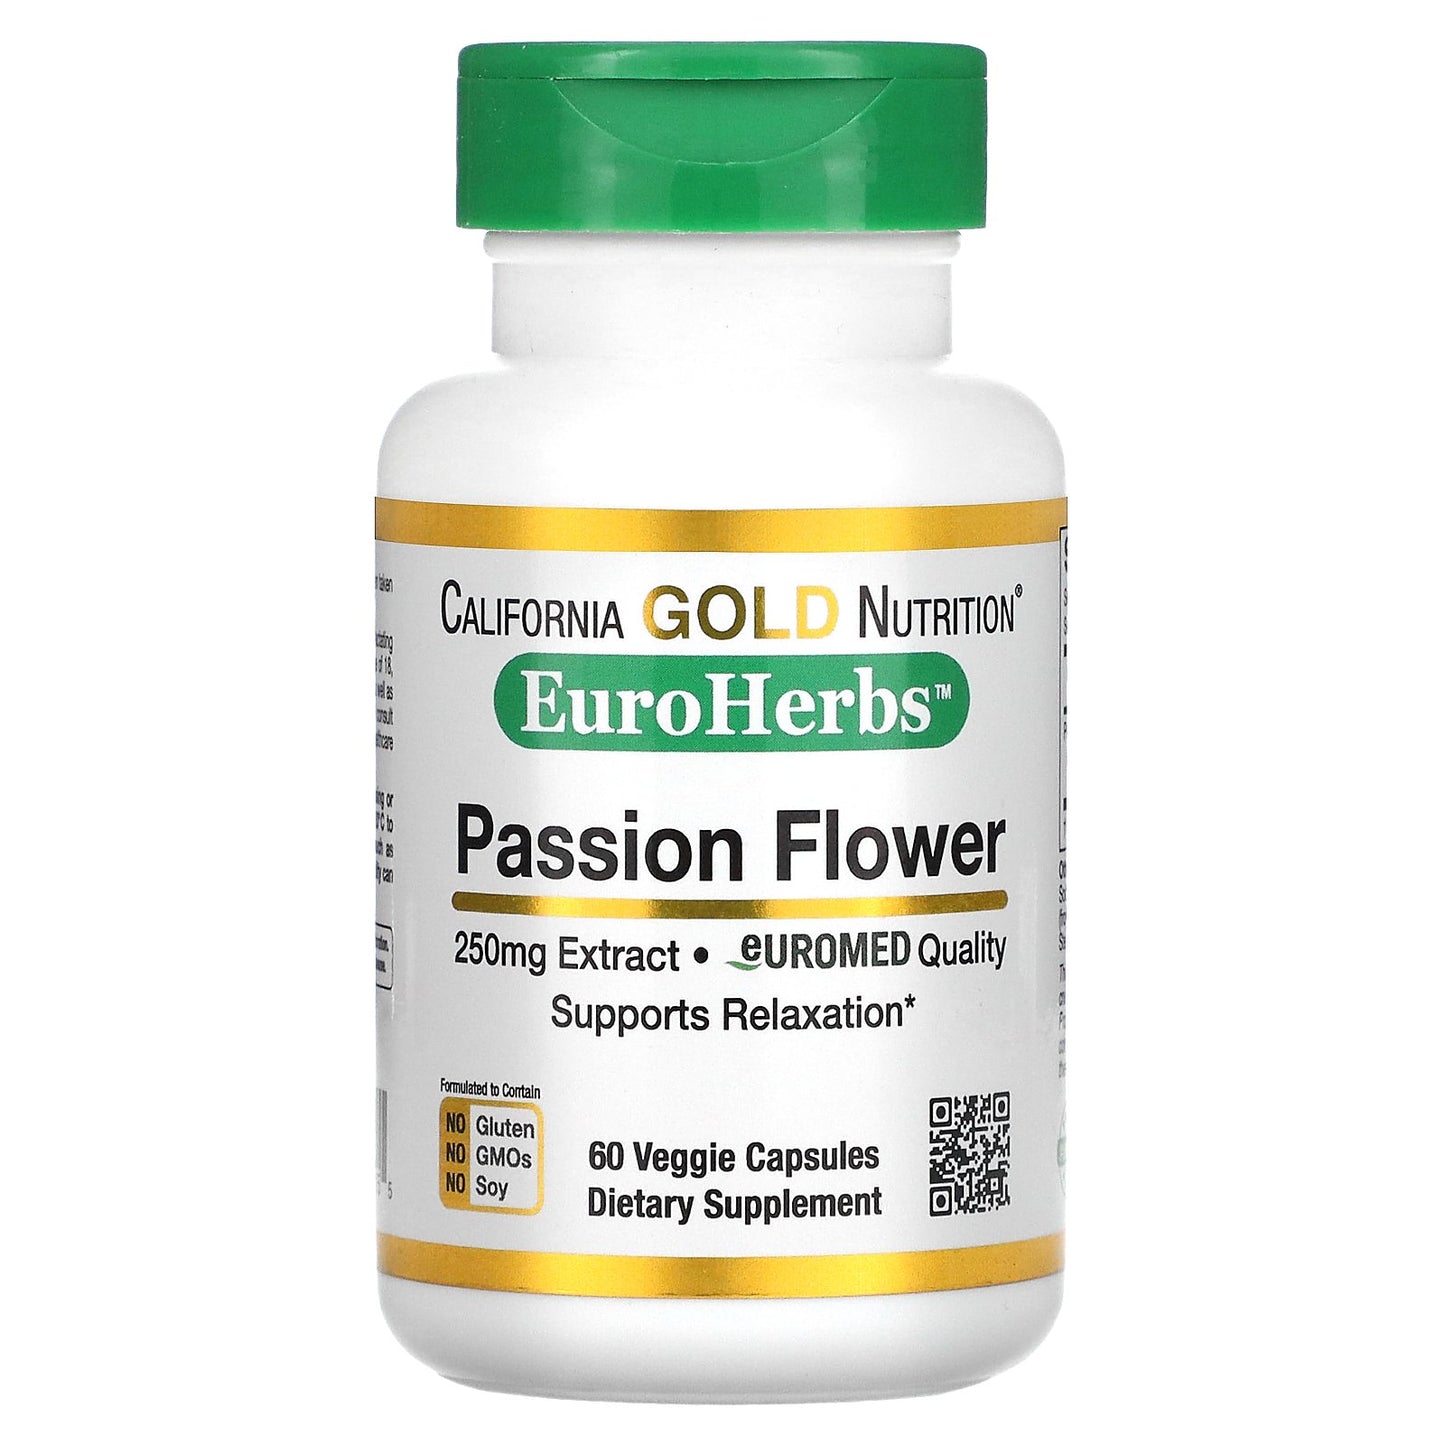 California Gold Nutrition, EuroHerbs, Passion Flower Extract,  Euromed Quality, 250 mg, 60 Veggie Capsules